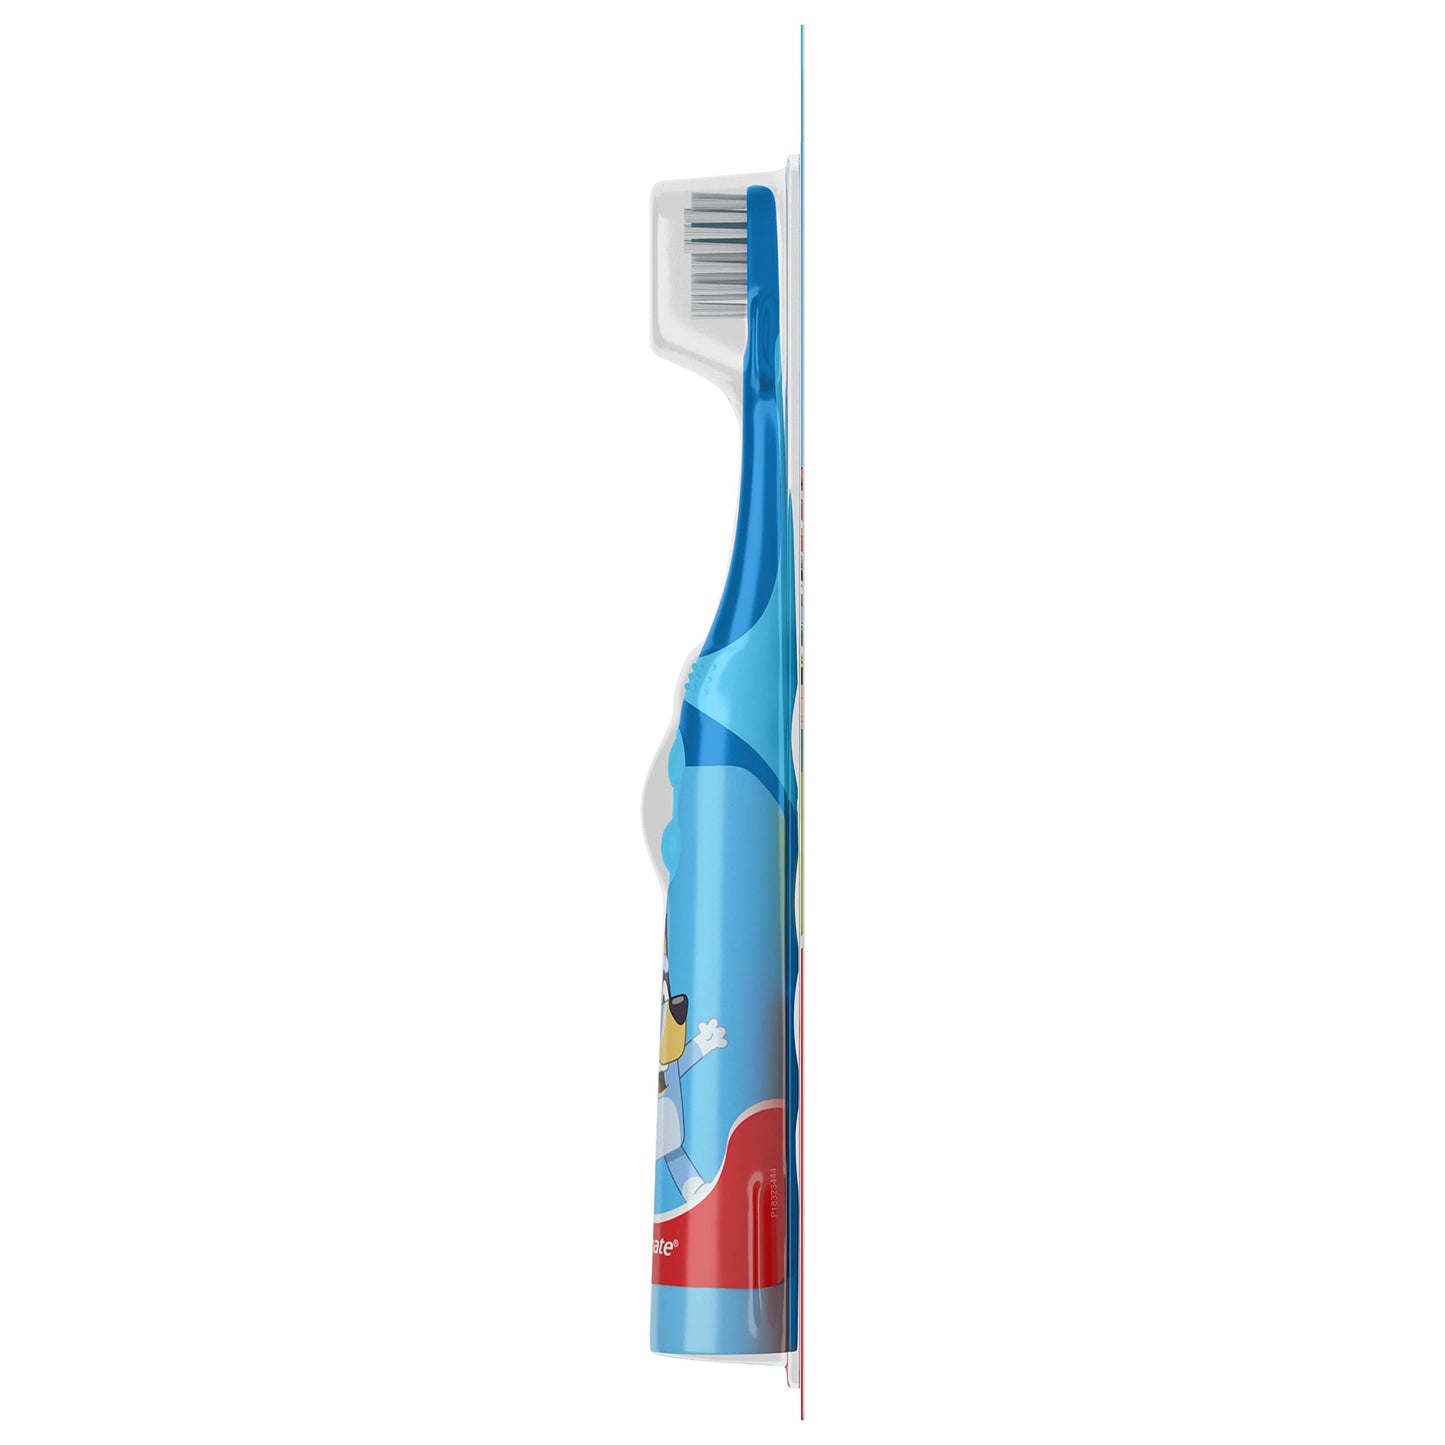 Colgate Kids Battery Powered Toothbrush, Kids Battery Toothbrush with Included AA Battery, Extra Soft Bristles, Flat-Laying Handle to Prevent Rolling, Bluey Toothbrush, 1 Pack